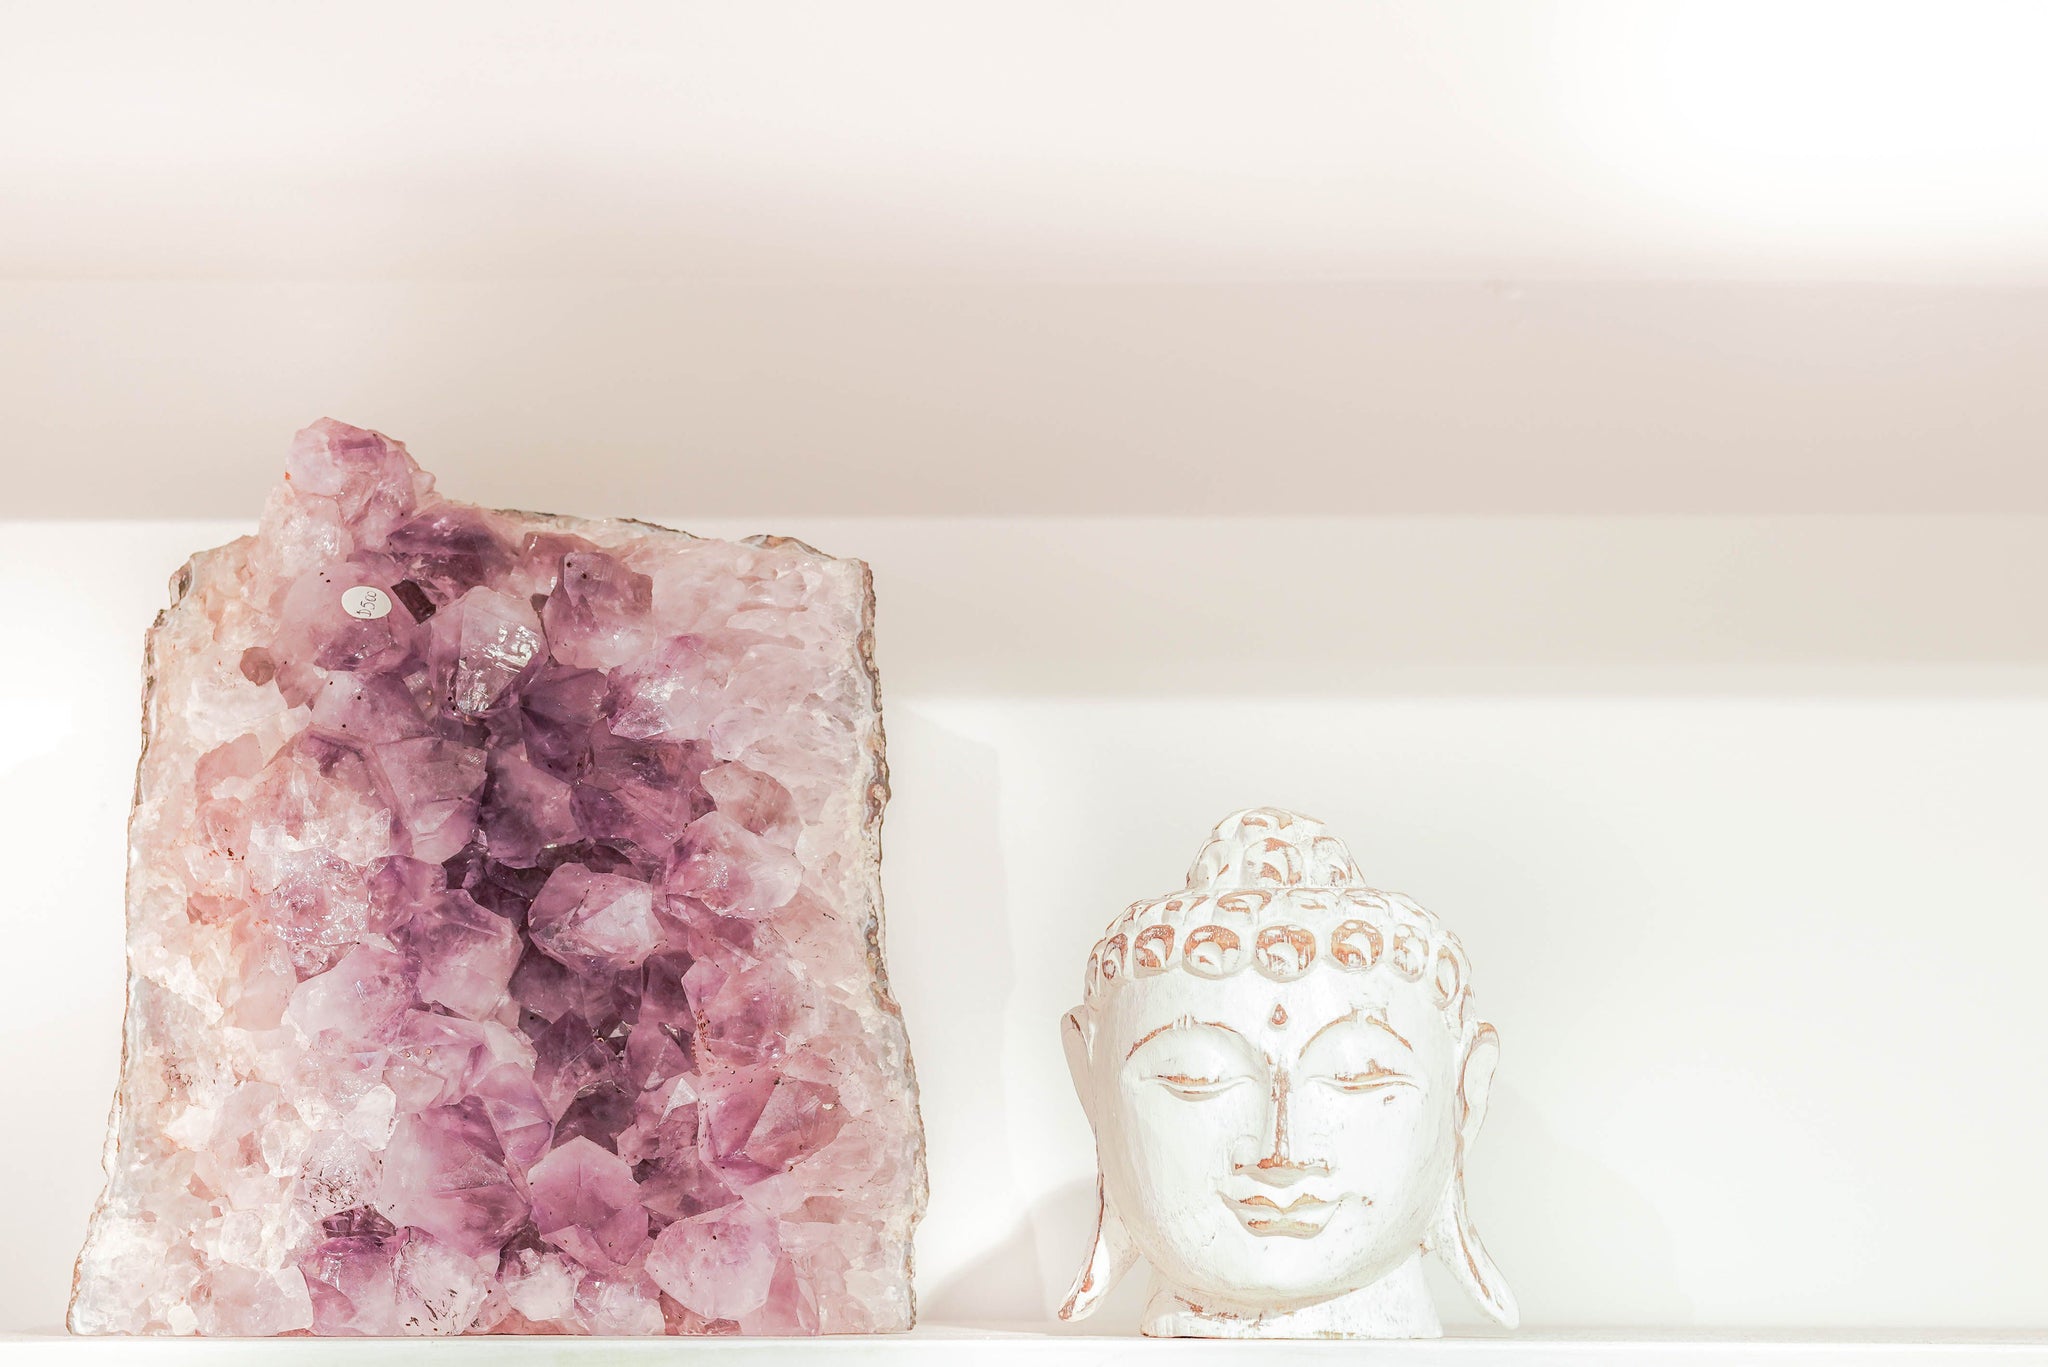 Incorporating crystals into your interior design style